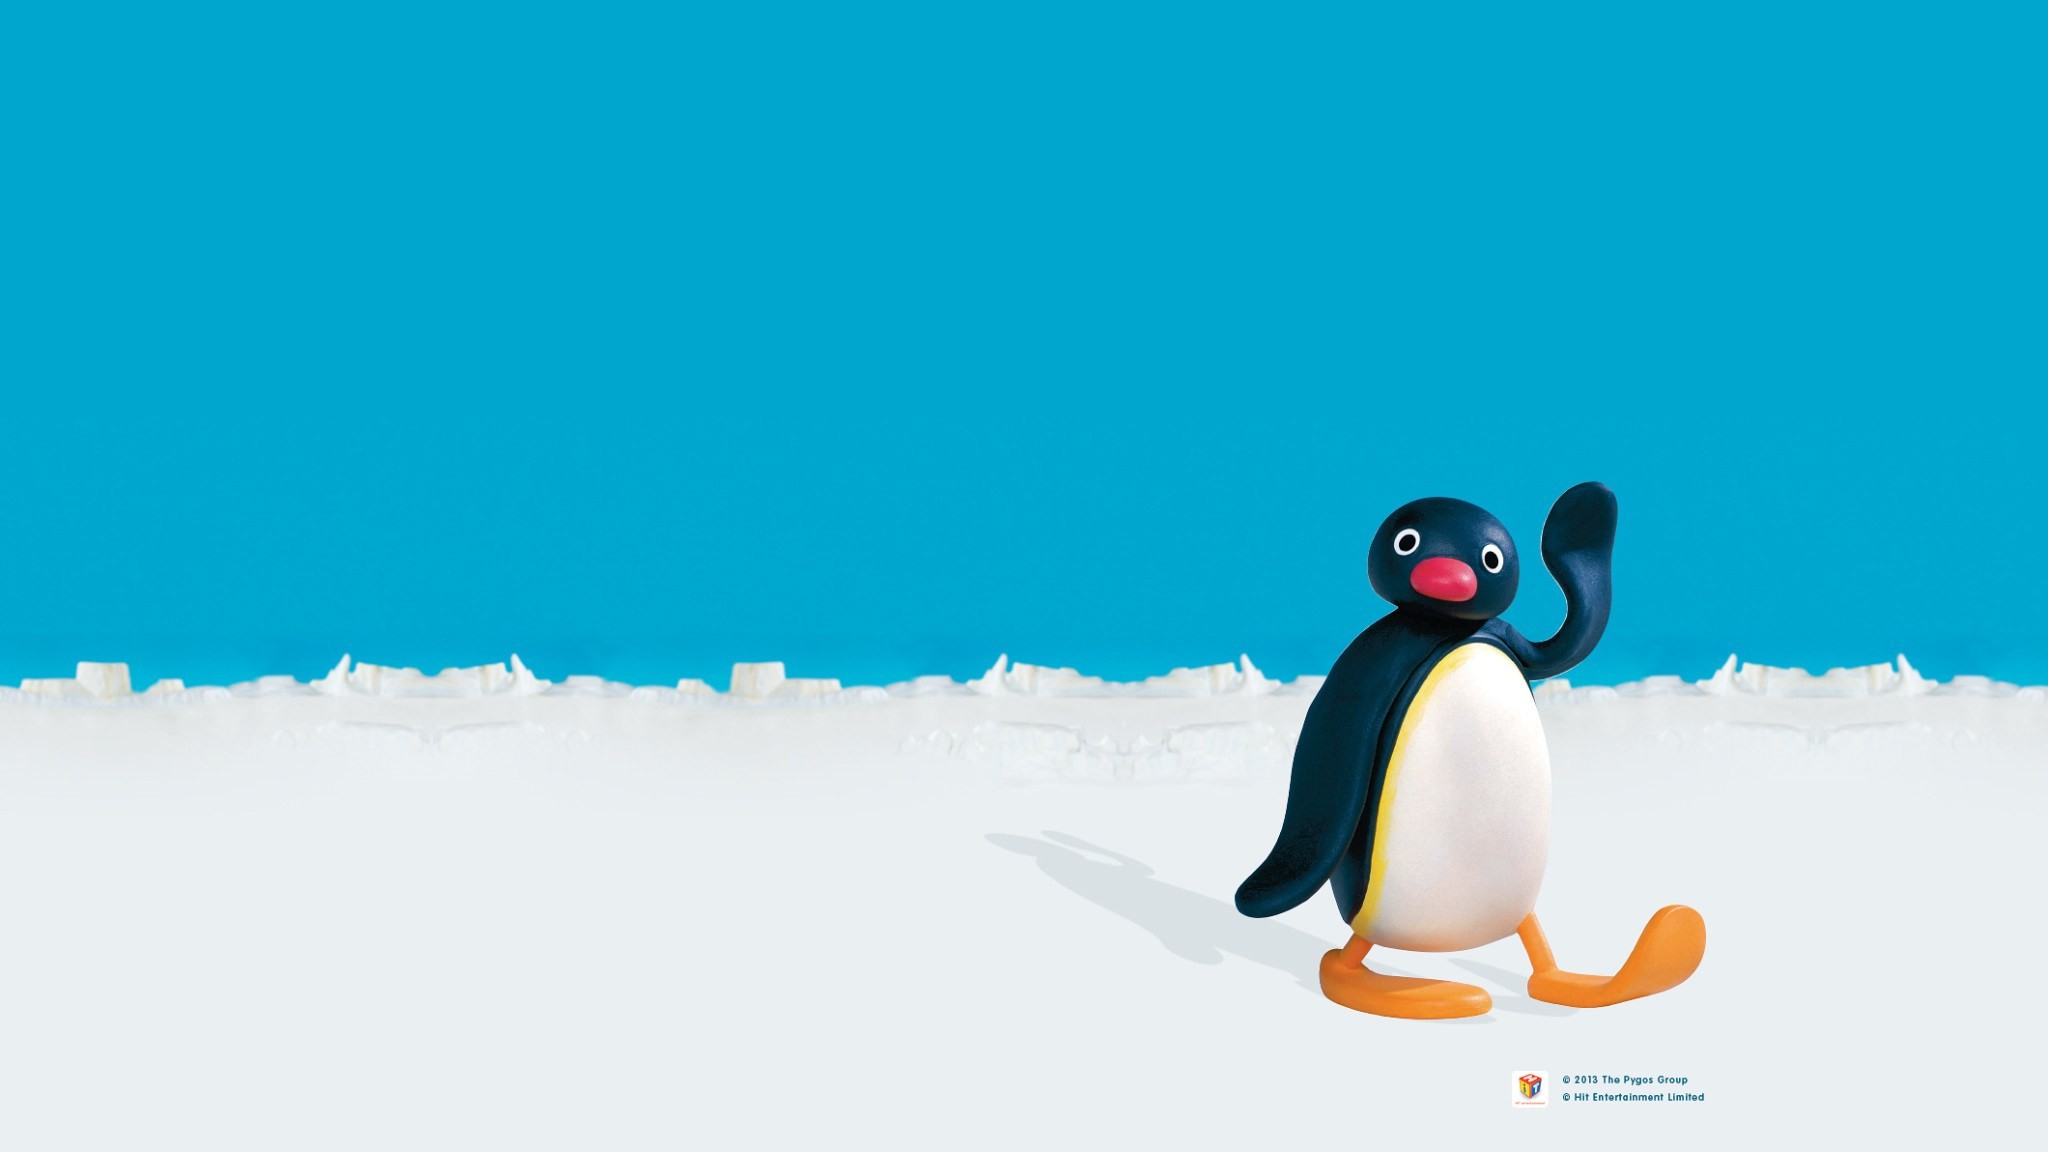 2048x1152 ... Perfect Pingu The Penguin Wallpaper Download free wallpapers and  desktop backgrounds in a variety of screen